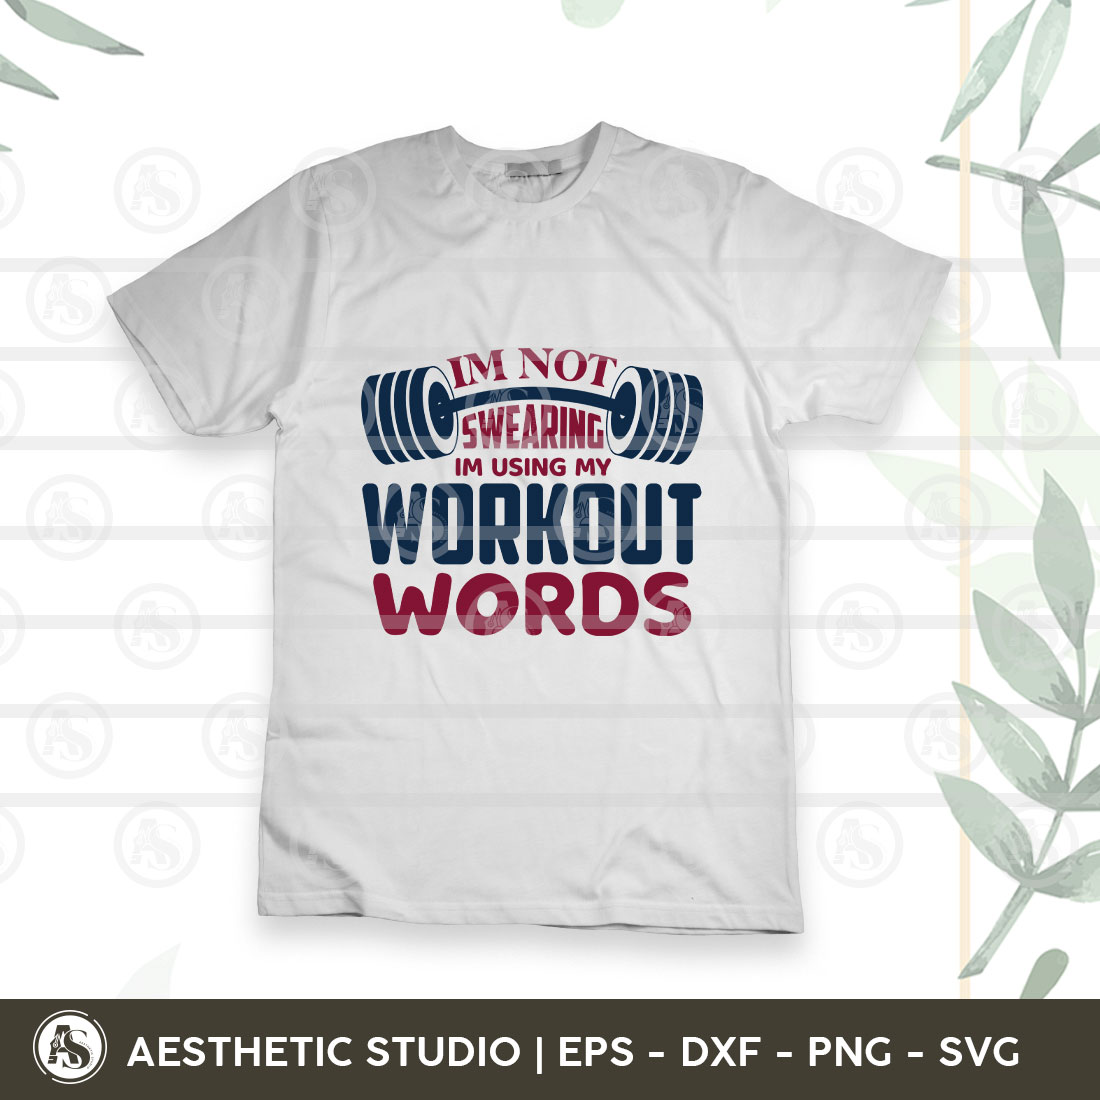 Gym Svg, I'm Not Swearing I'm Using My Workout Words, Gym Tshirt Svg, Gym Lover, Workout, Fitness, Weights, Gym Quotes, Gym Png Cut Files, Dxf, Svg, Eps, preview image.